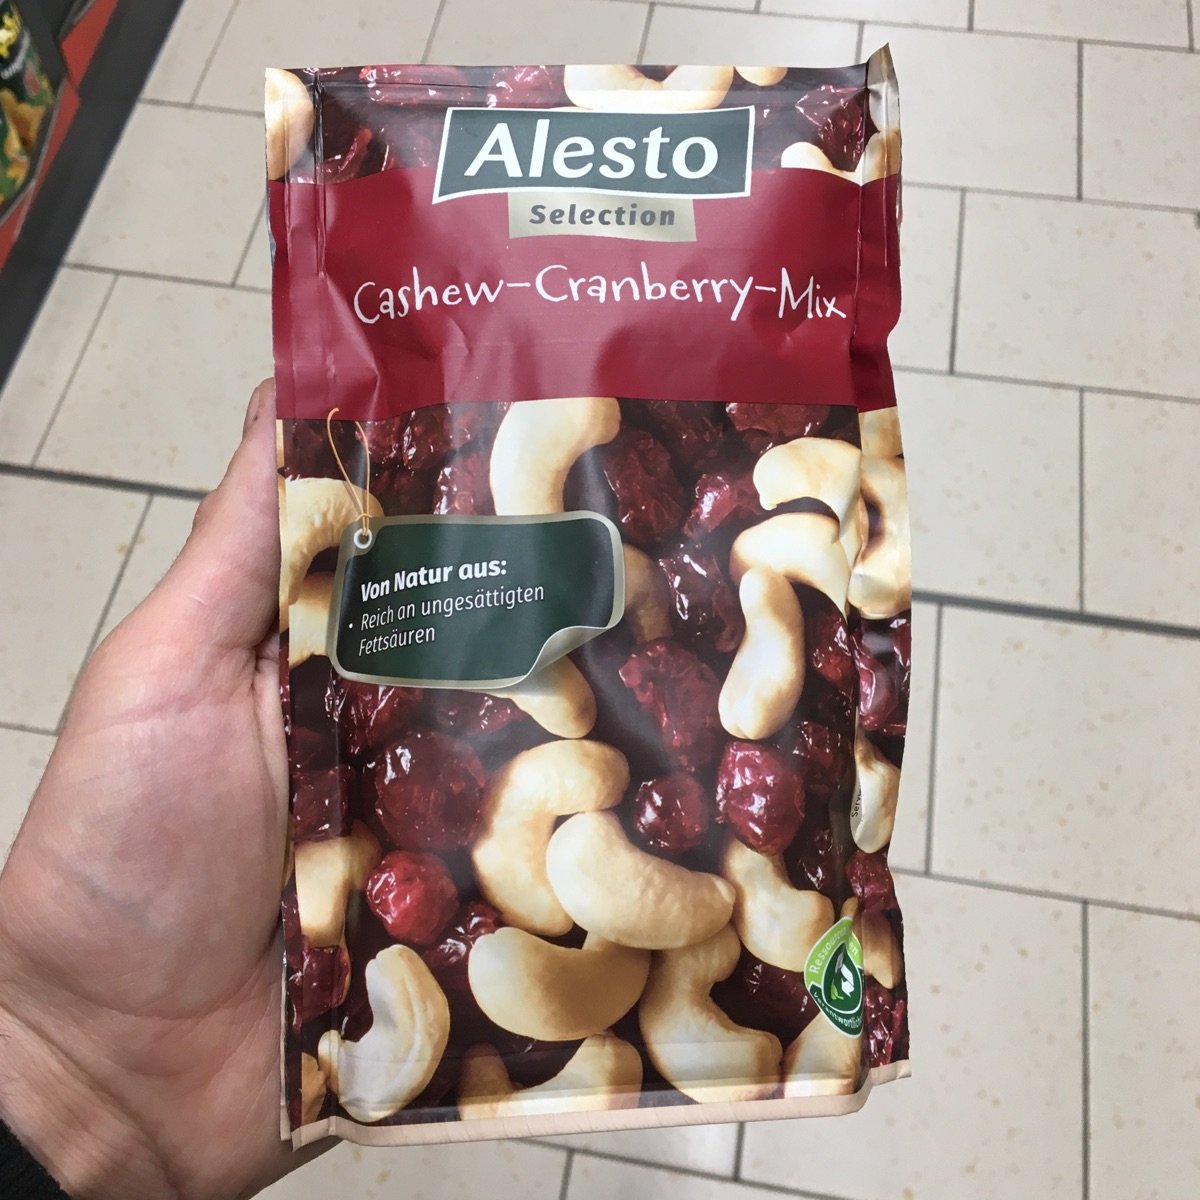 Alesto and Cashew | Cranberry Review Mix abillion